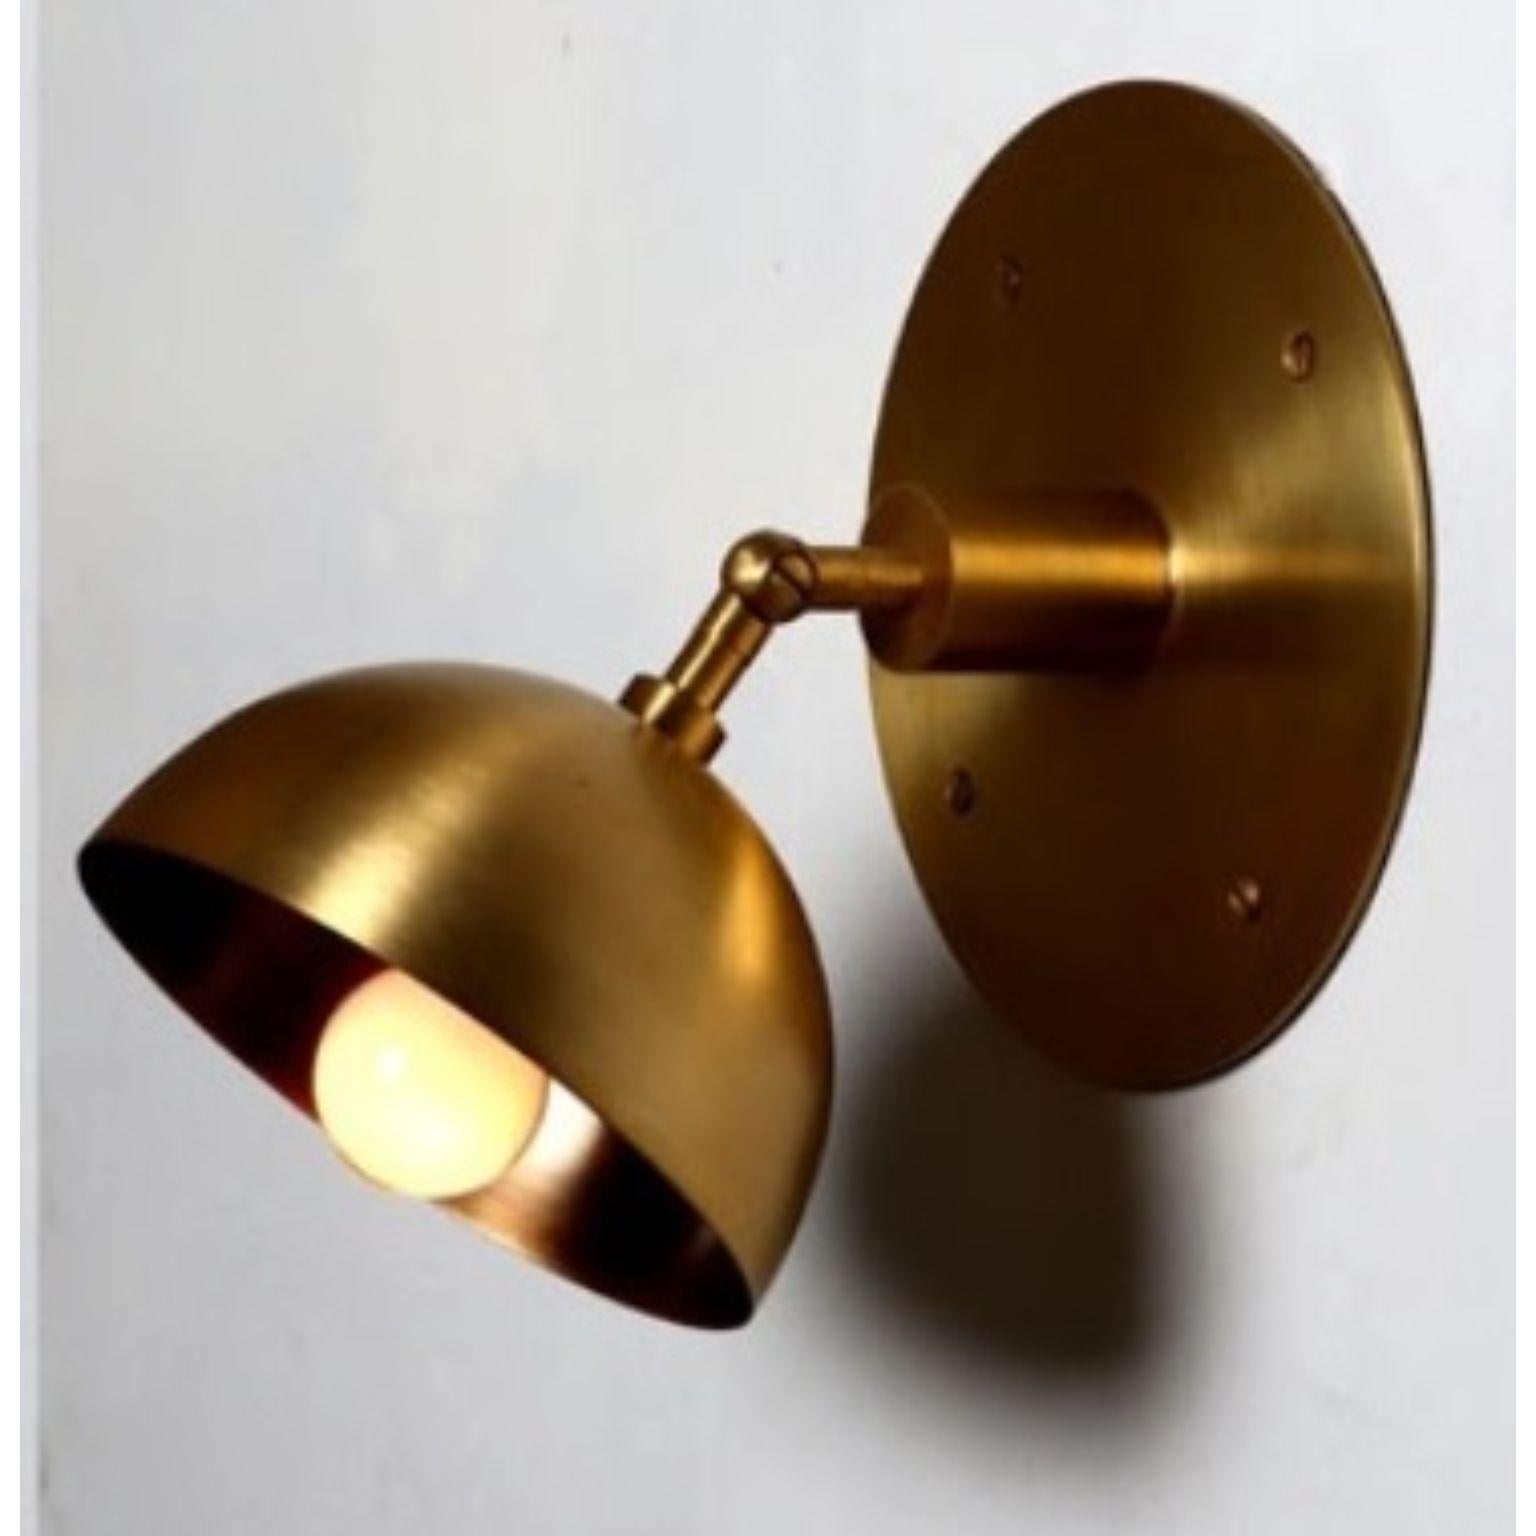 Fly Brass Dome Wall Sconce by Lamp Shaper
Dimensions: D 20.5 x W 21.5 x H 21.5 cm.
Materials: Brass.

Different finishes available: raw brass, aged brass, burnt brass and brushed brass Please contact us.

All our lamps can be wired according to each